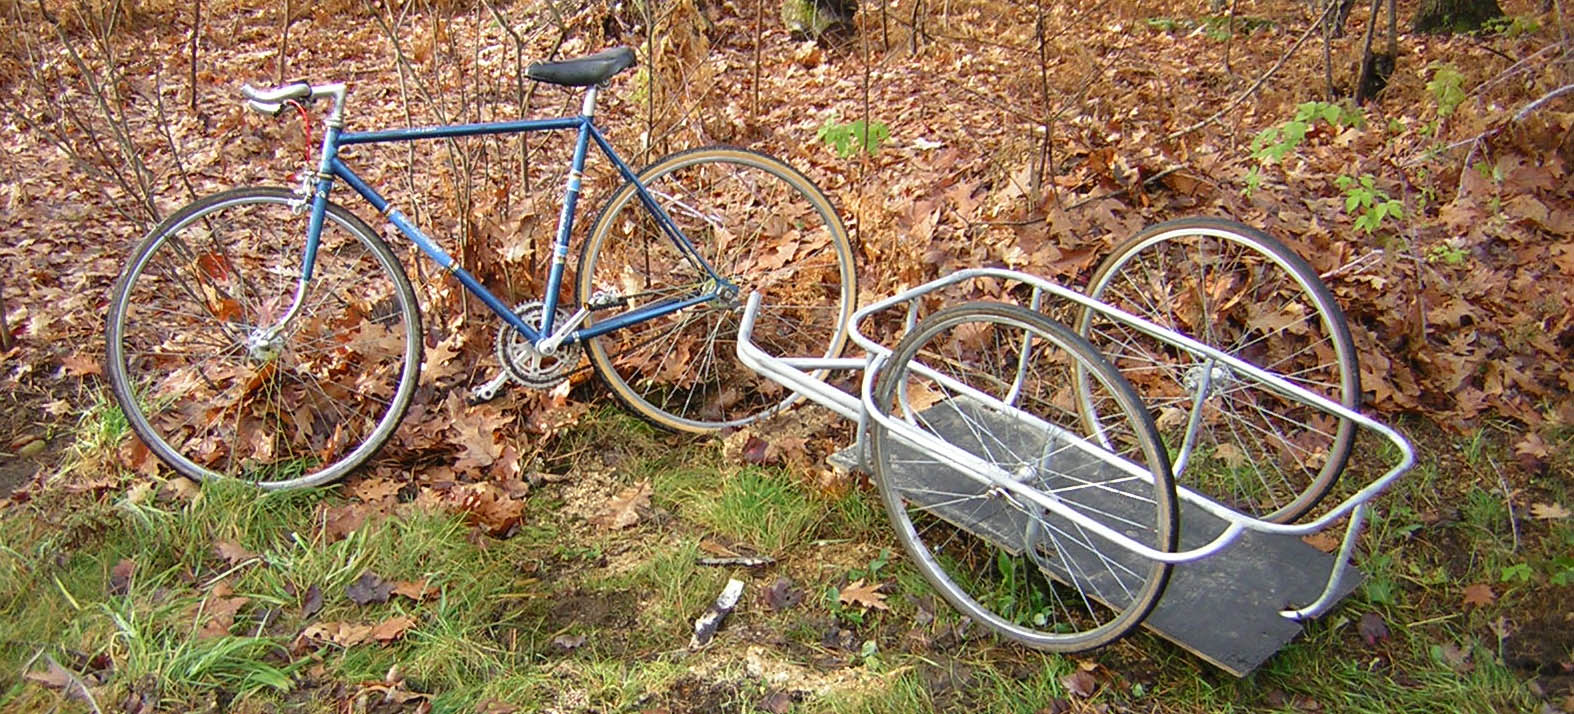 Bicycle cargo trailer--200 lb capacity, $30 for parts